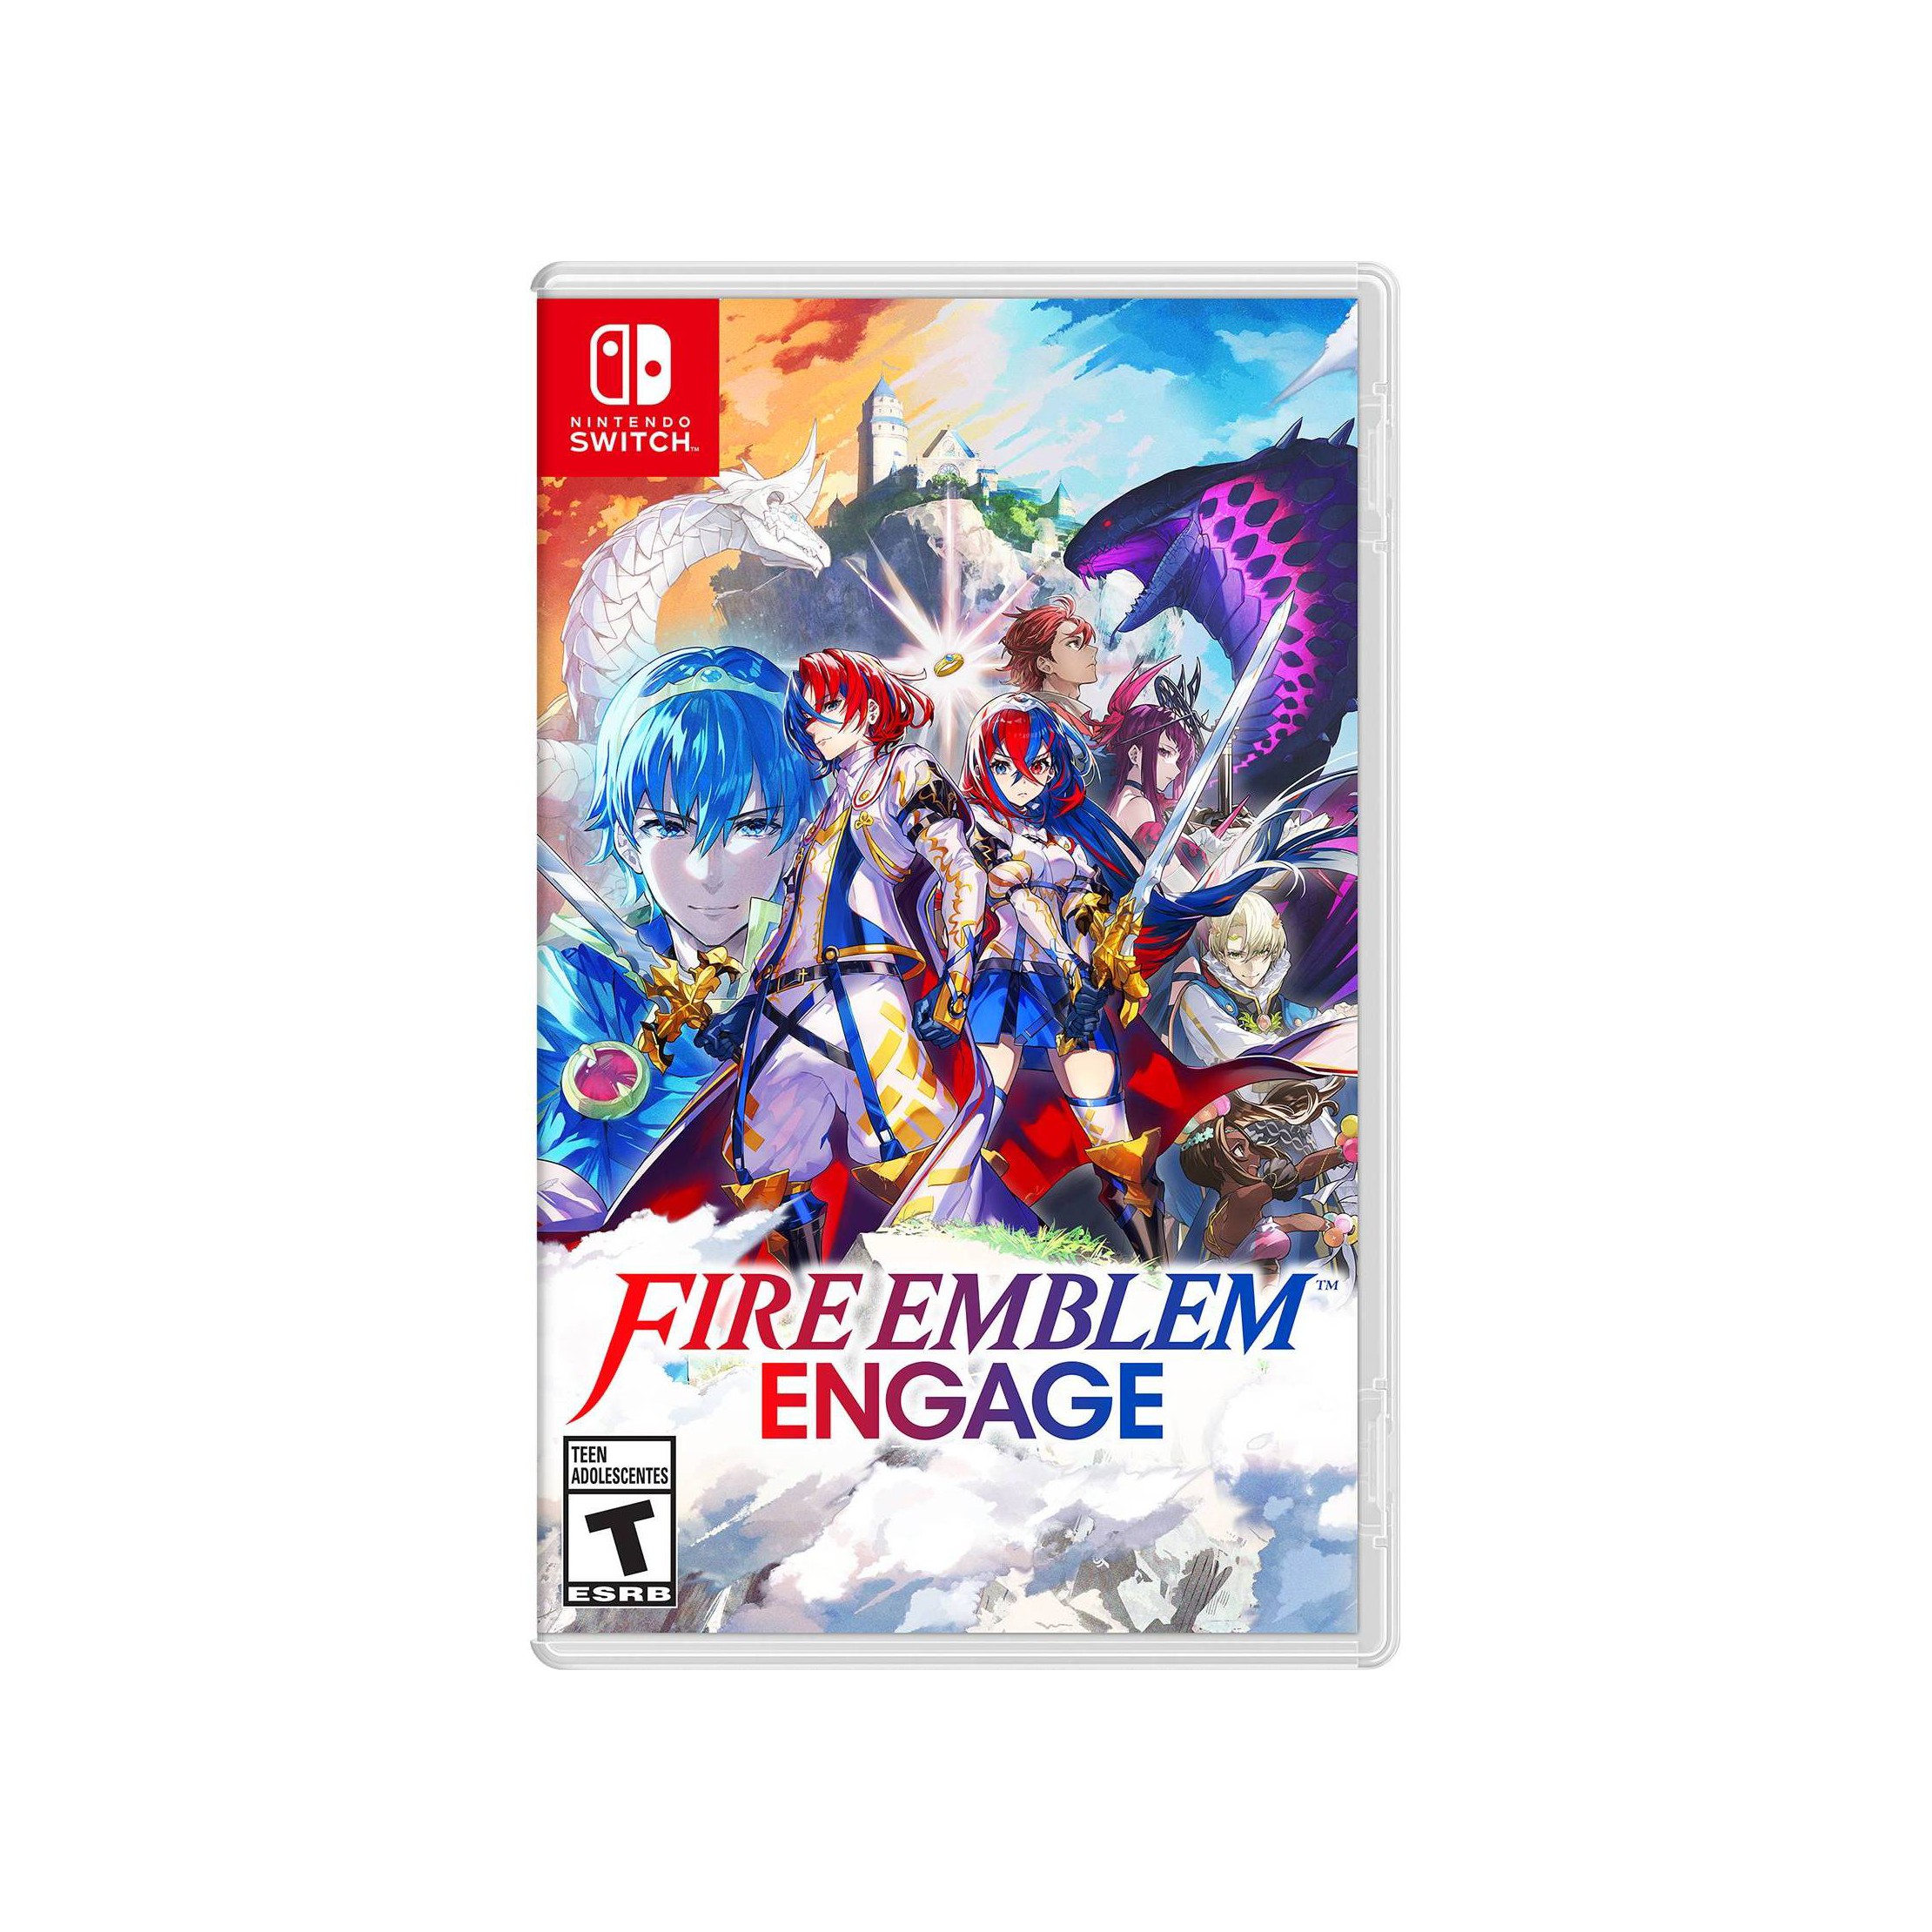 Fire Emblem Engage Divine Edition - for Switch